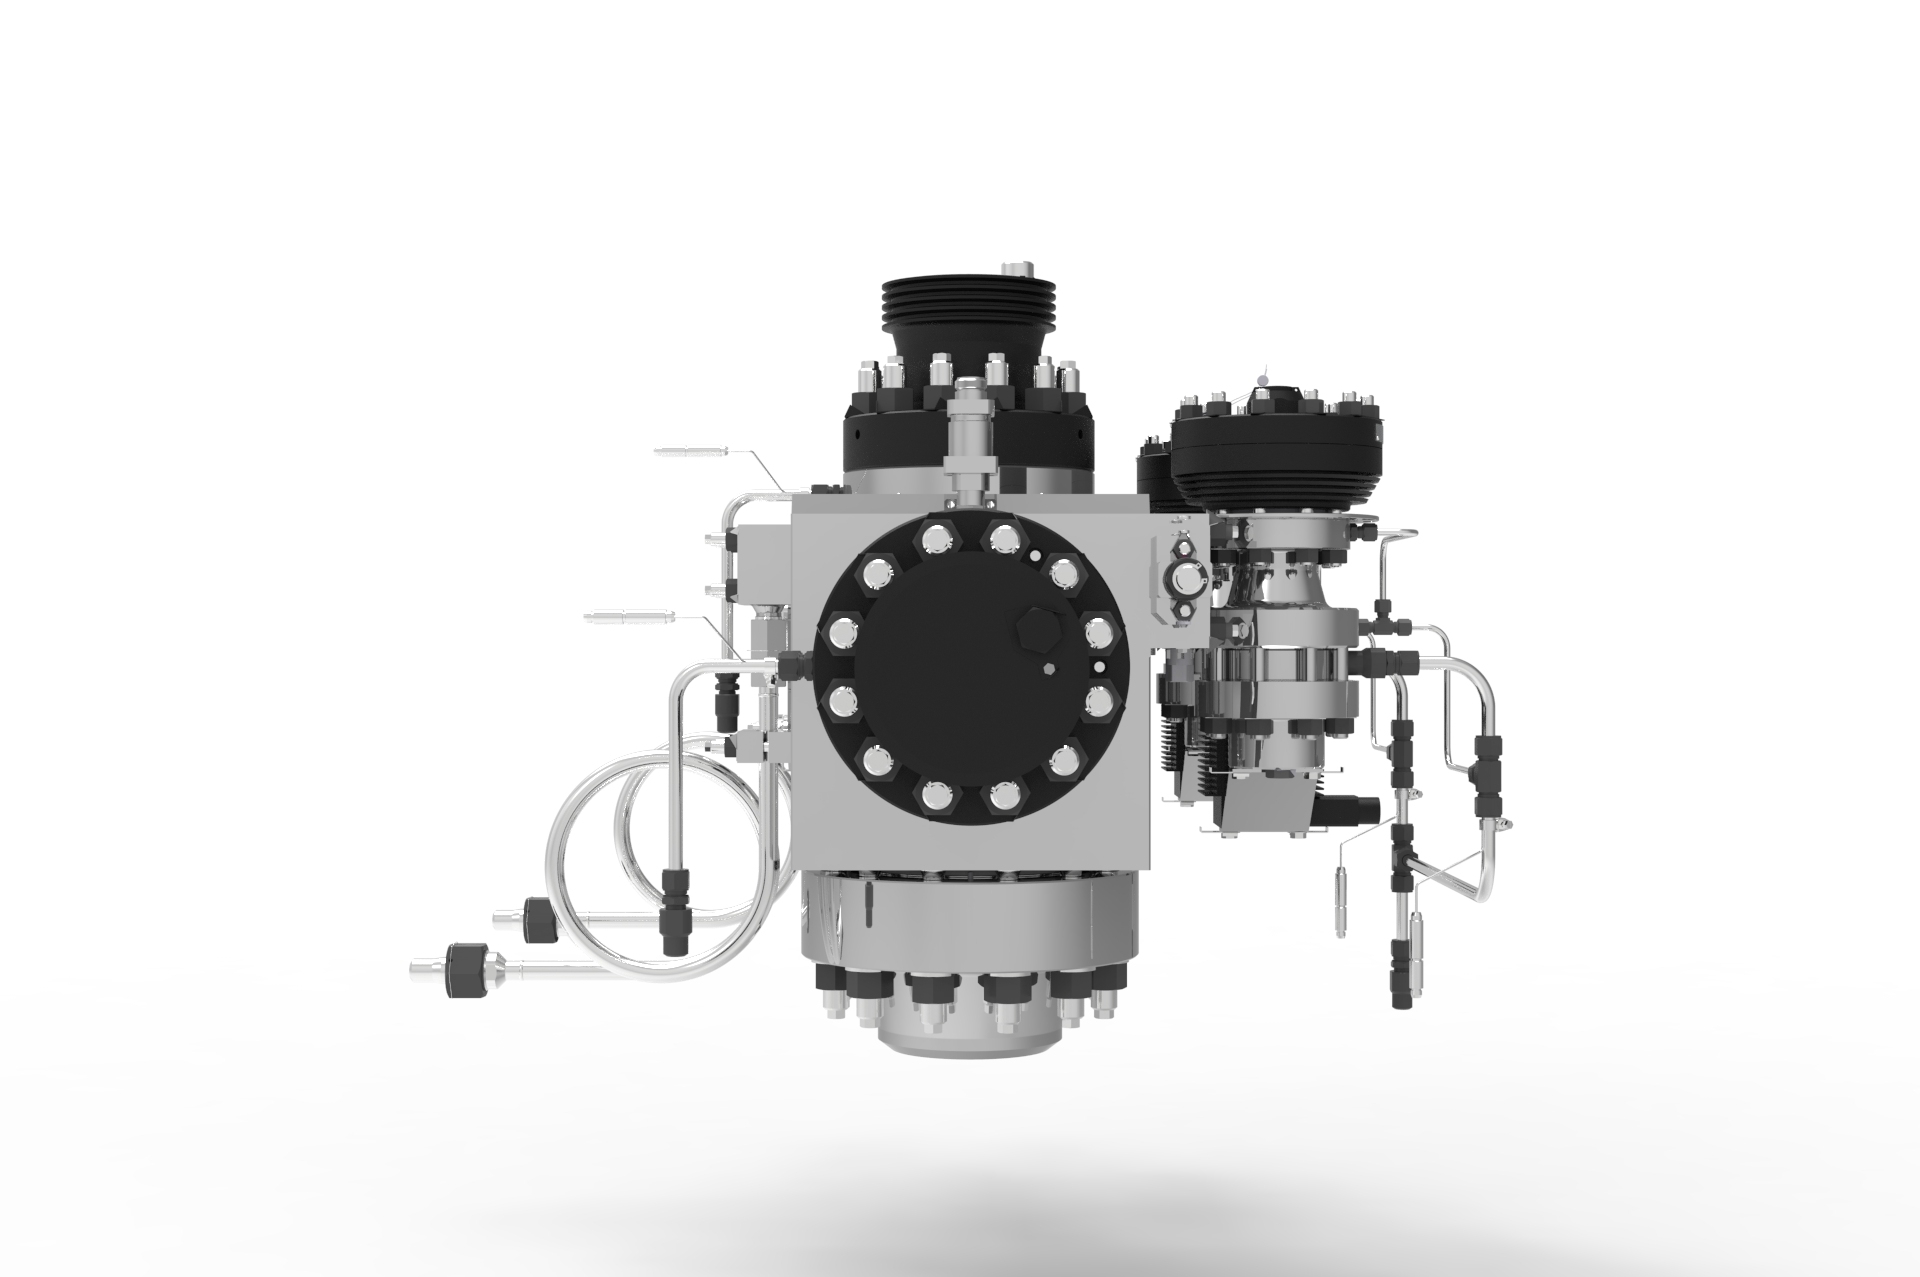 Left side view of a SEBIM CTSV 3000 Compact Tandem Safety Valves manufactured by Trillium Flow Technologies